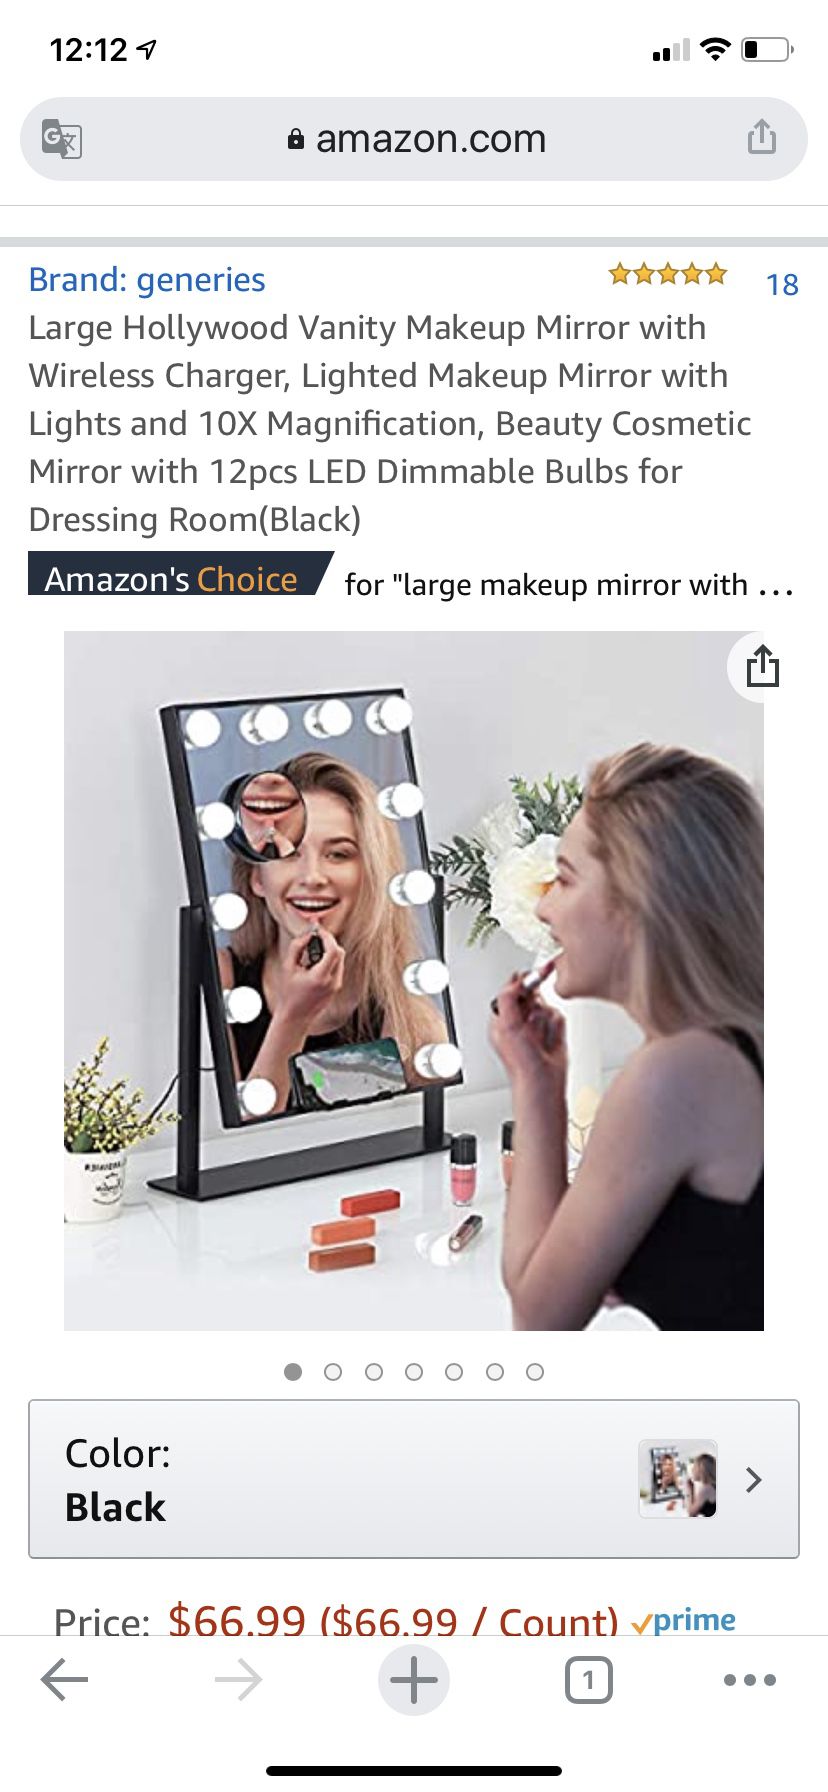 Large Hollywood Vanity Makeup Mirror with Wireless Charger, Lighted Makeup Mirror with Lights and 10X Magnification, Beauty Cosmetic Mirror with 12pc